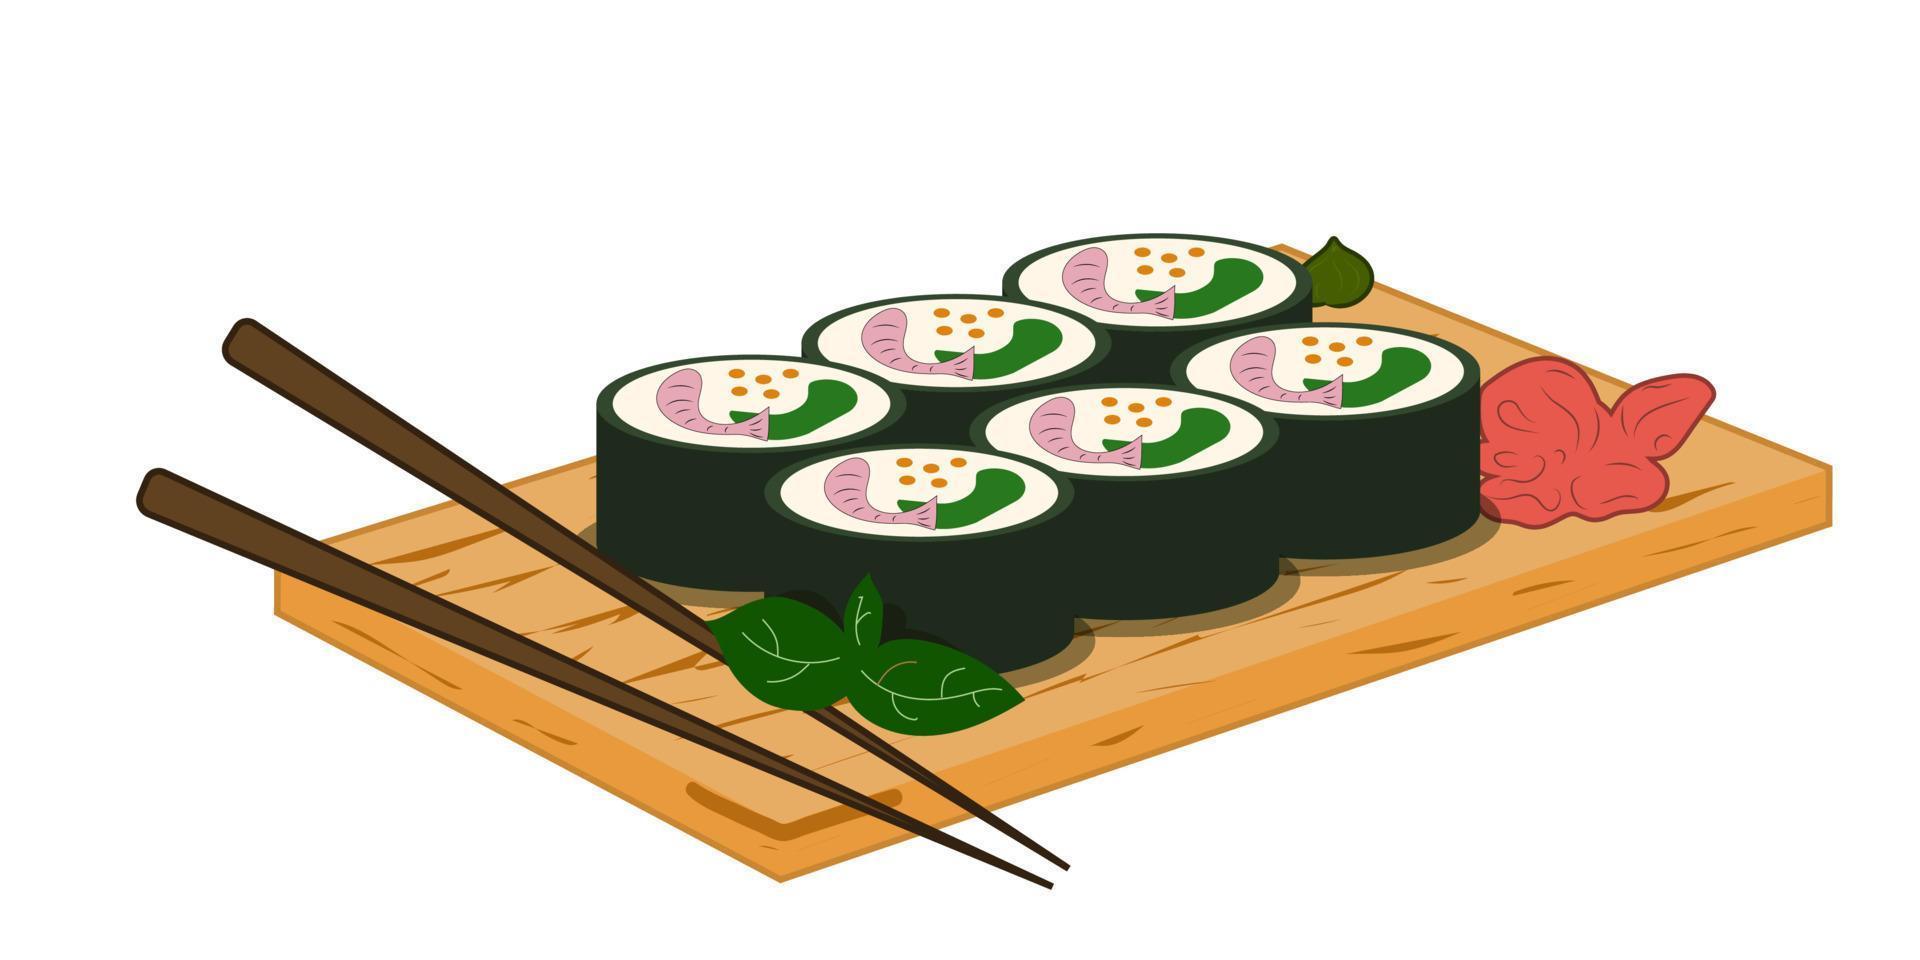 Sushis rolls, wooden board with chopsticks, soya souse. Asian food Vector illustration